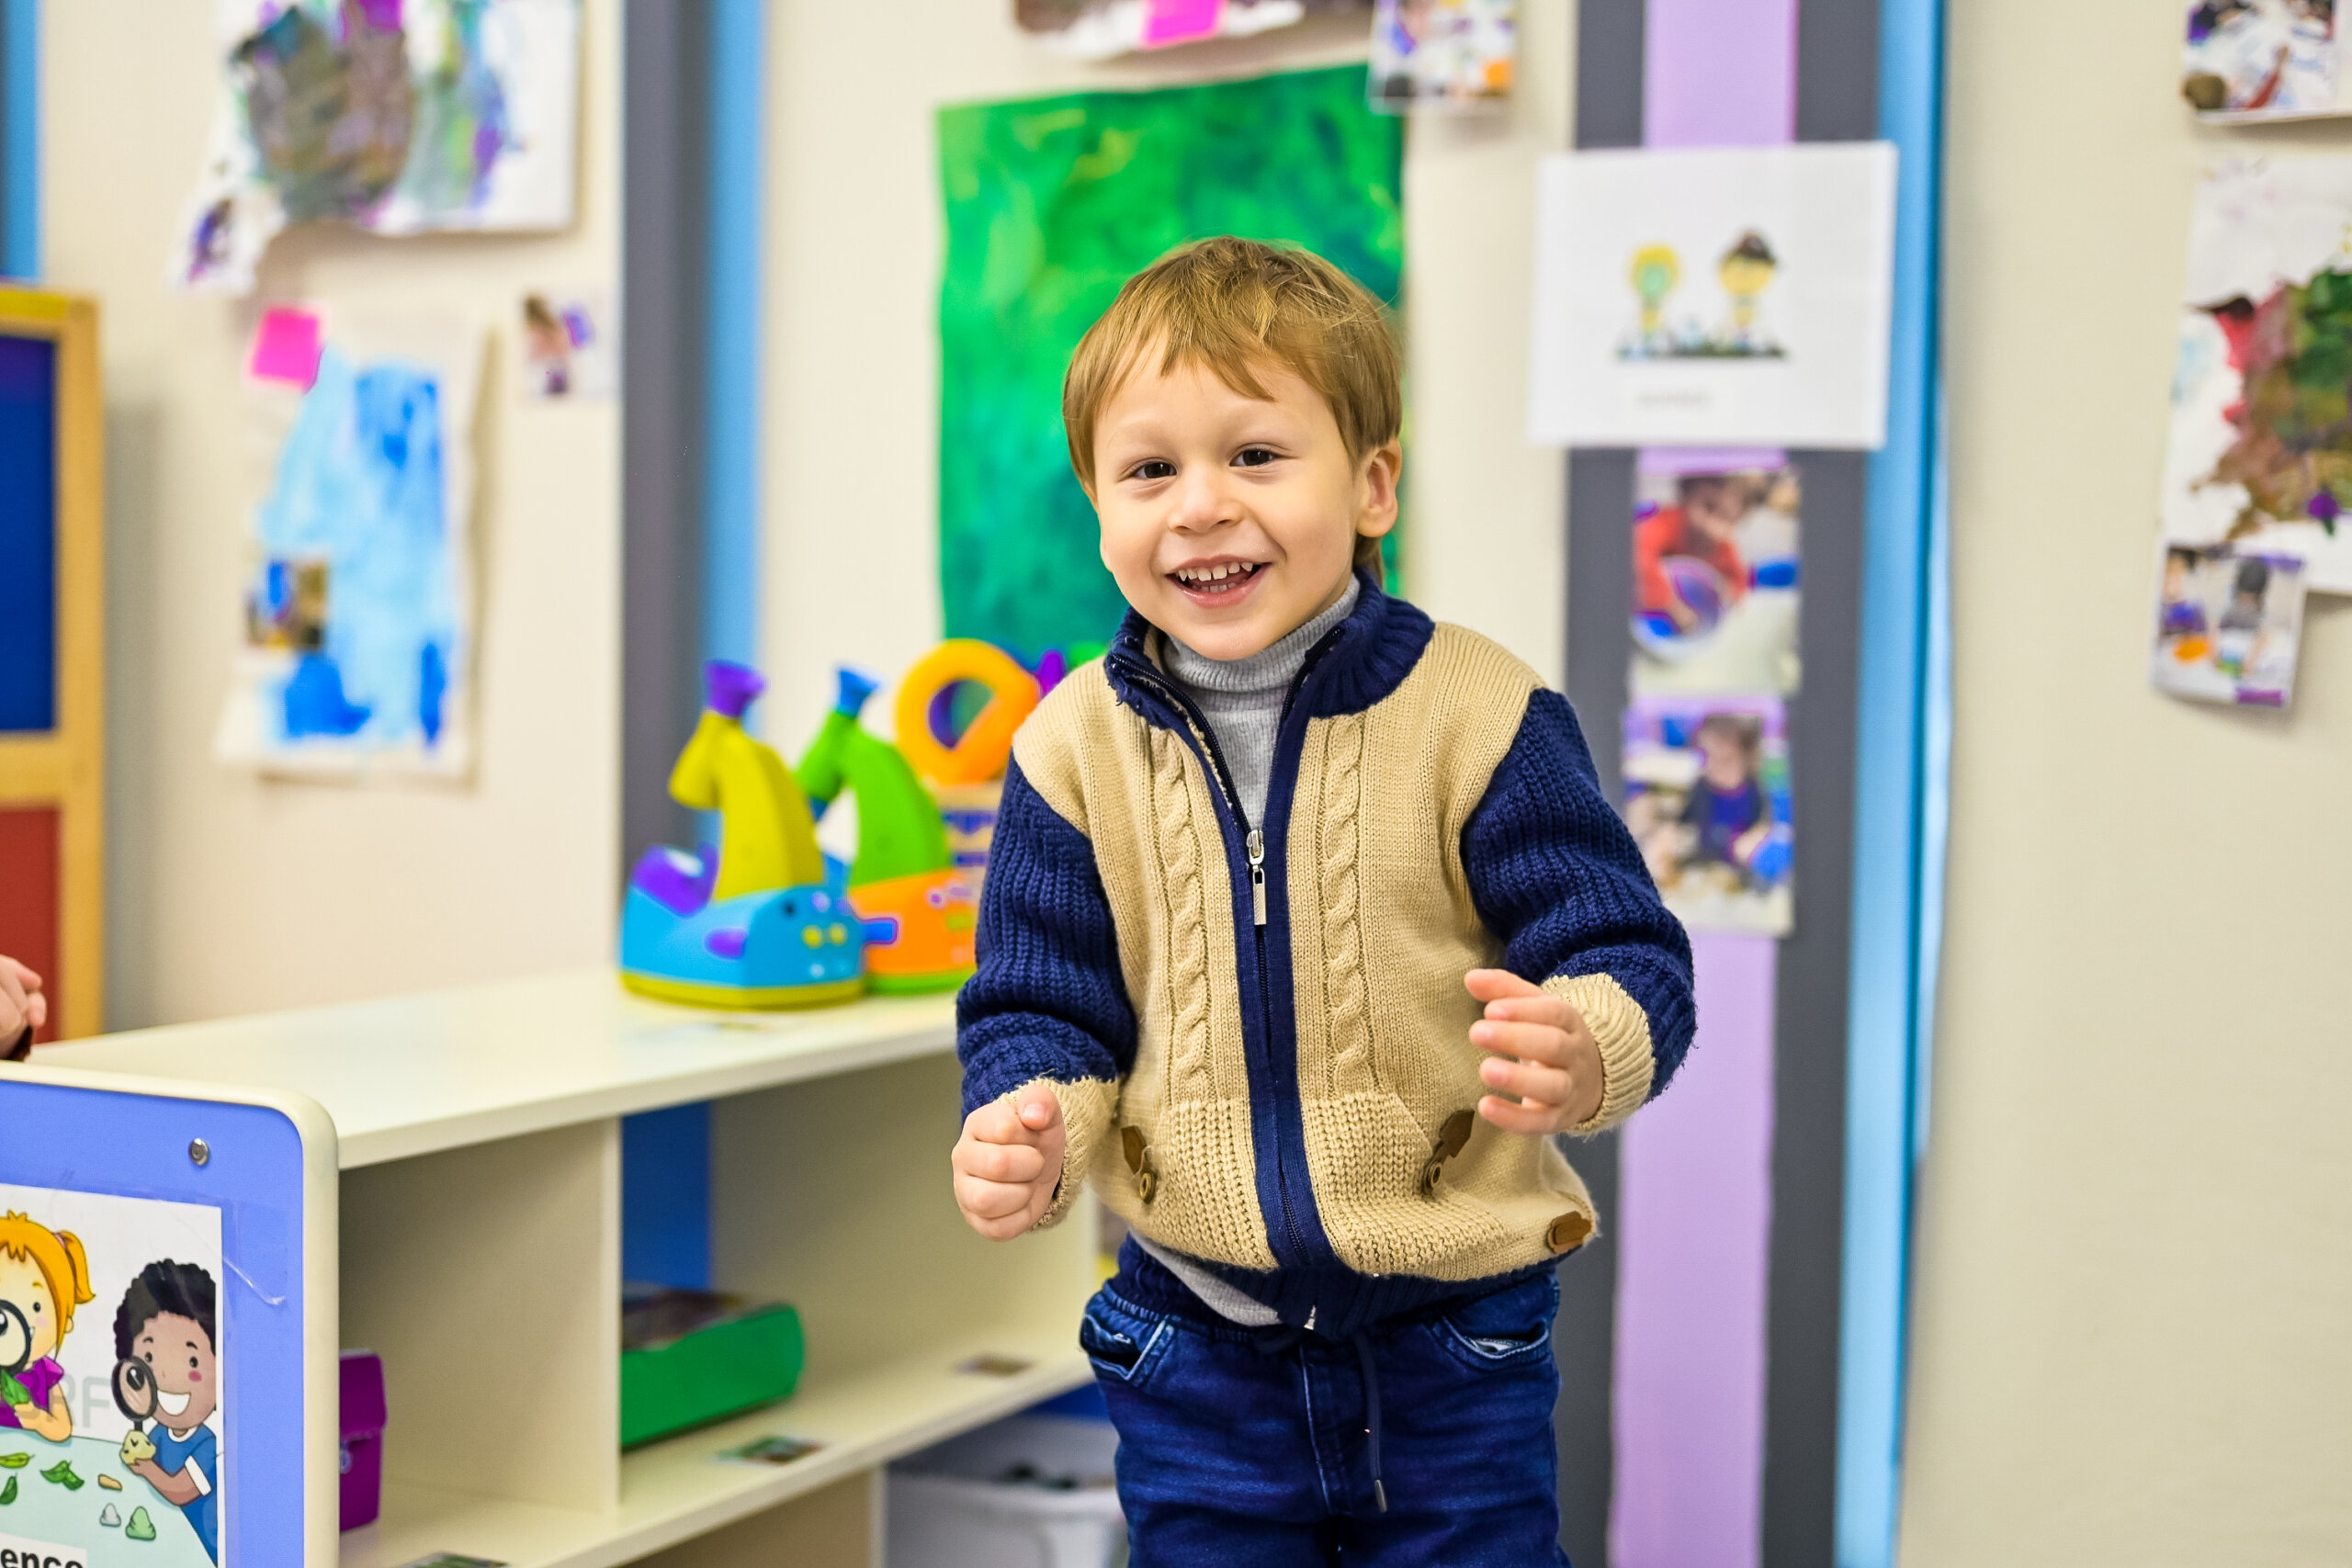 Smiling young boy in a beige and navy sweater playing in a daycare classroom